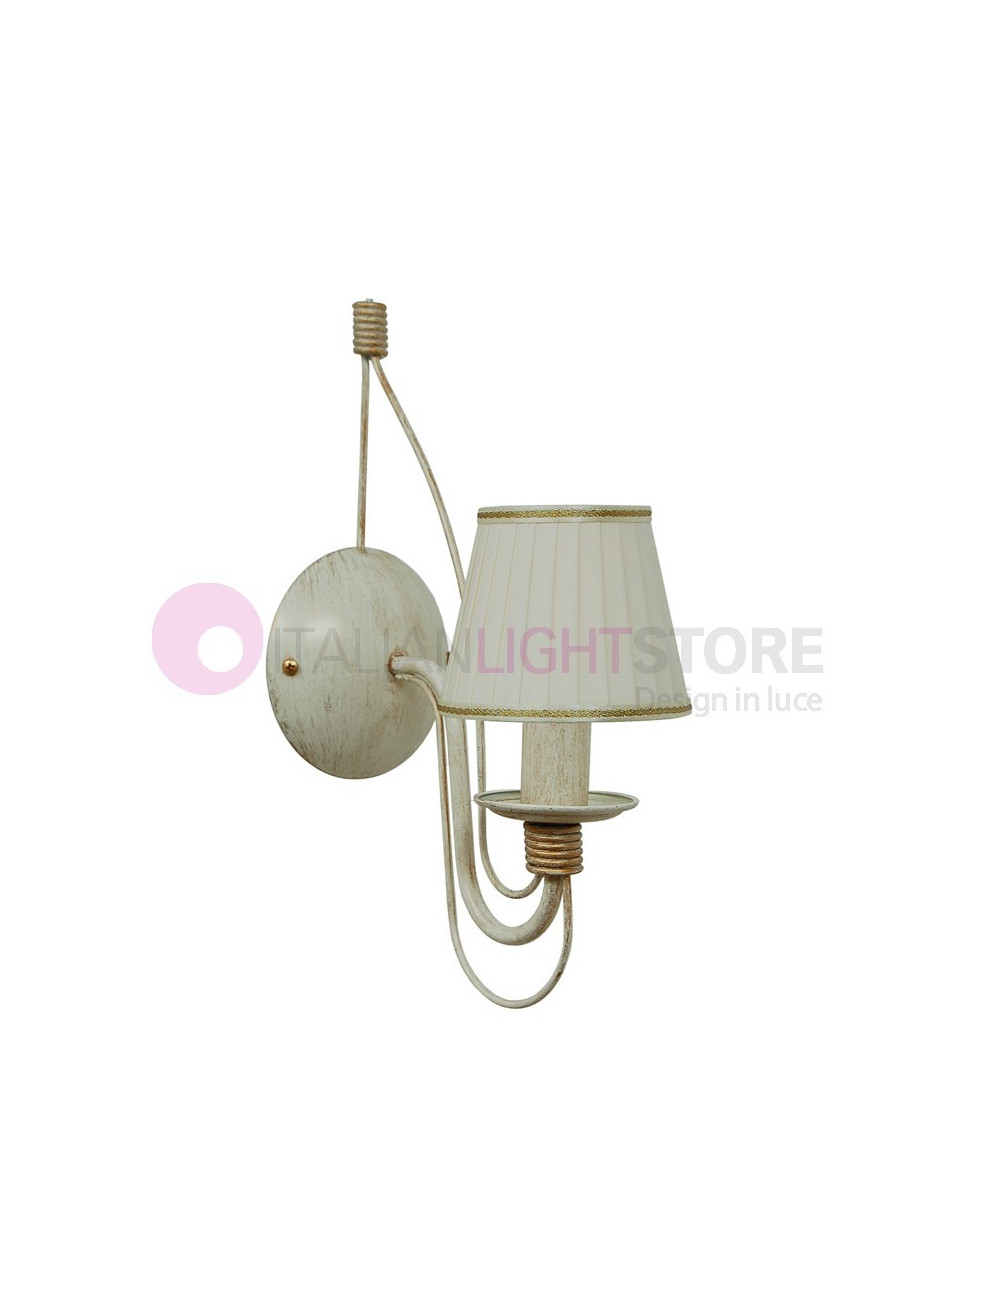 Flemish Classic Rustic Iron Wall Light with Ivory Lampshade